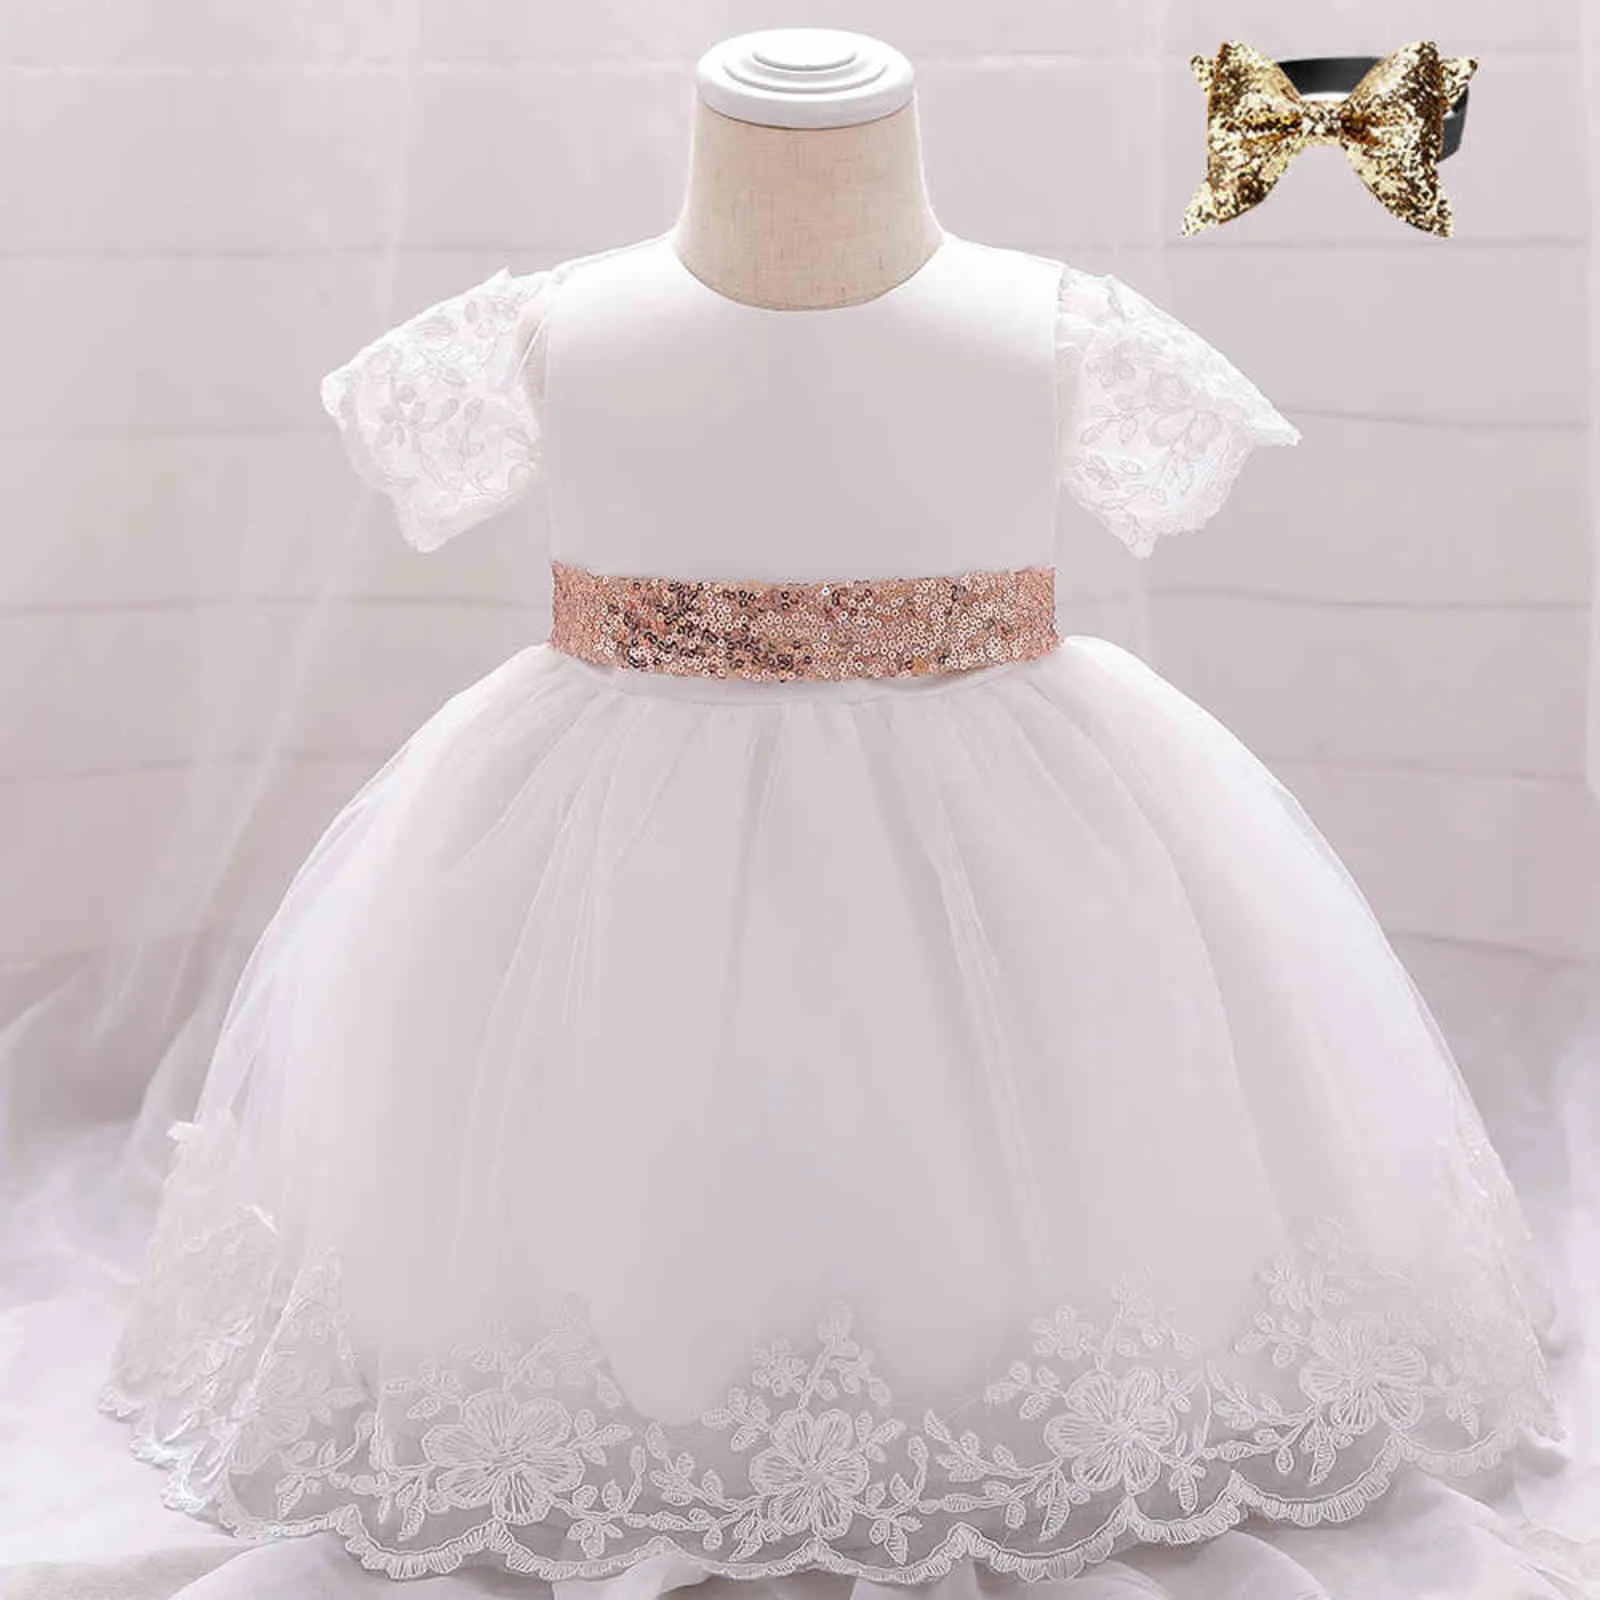 Summer Lace Bow Sequined Christening Princess Toddler Birthday Party Ball Gown Baby Girl Dress Newborn Children Baptism 1 Year G1129